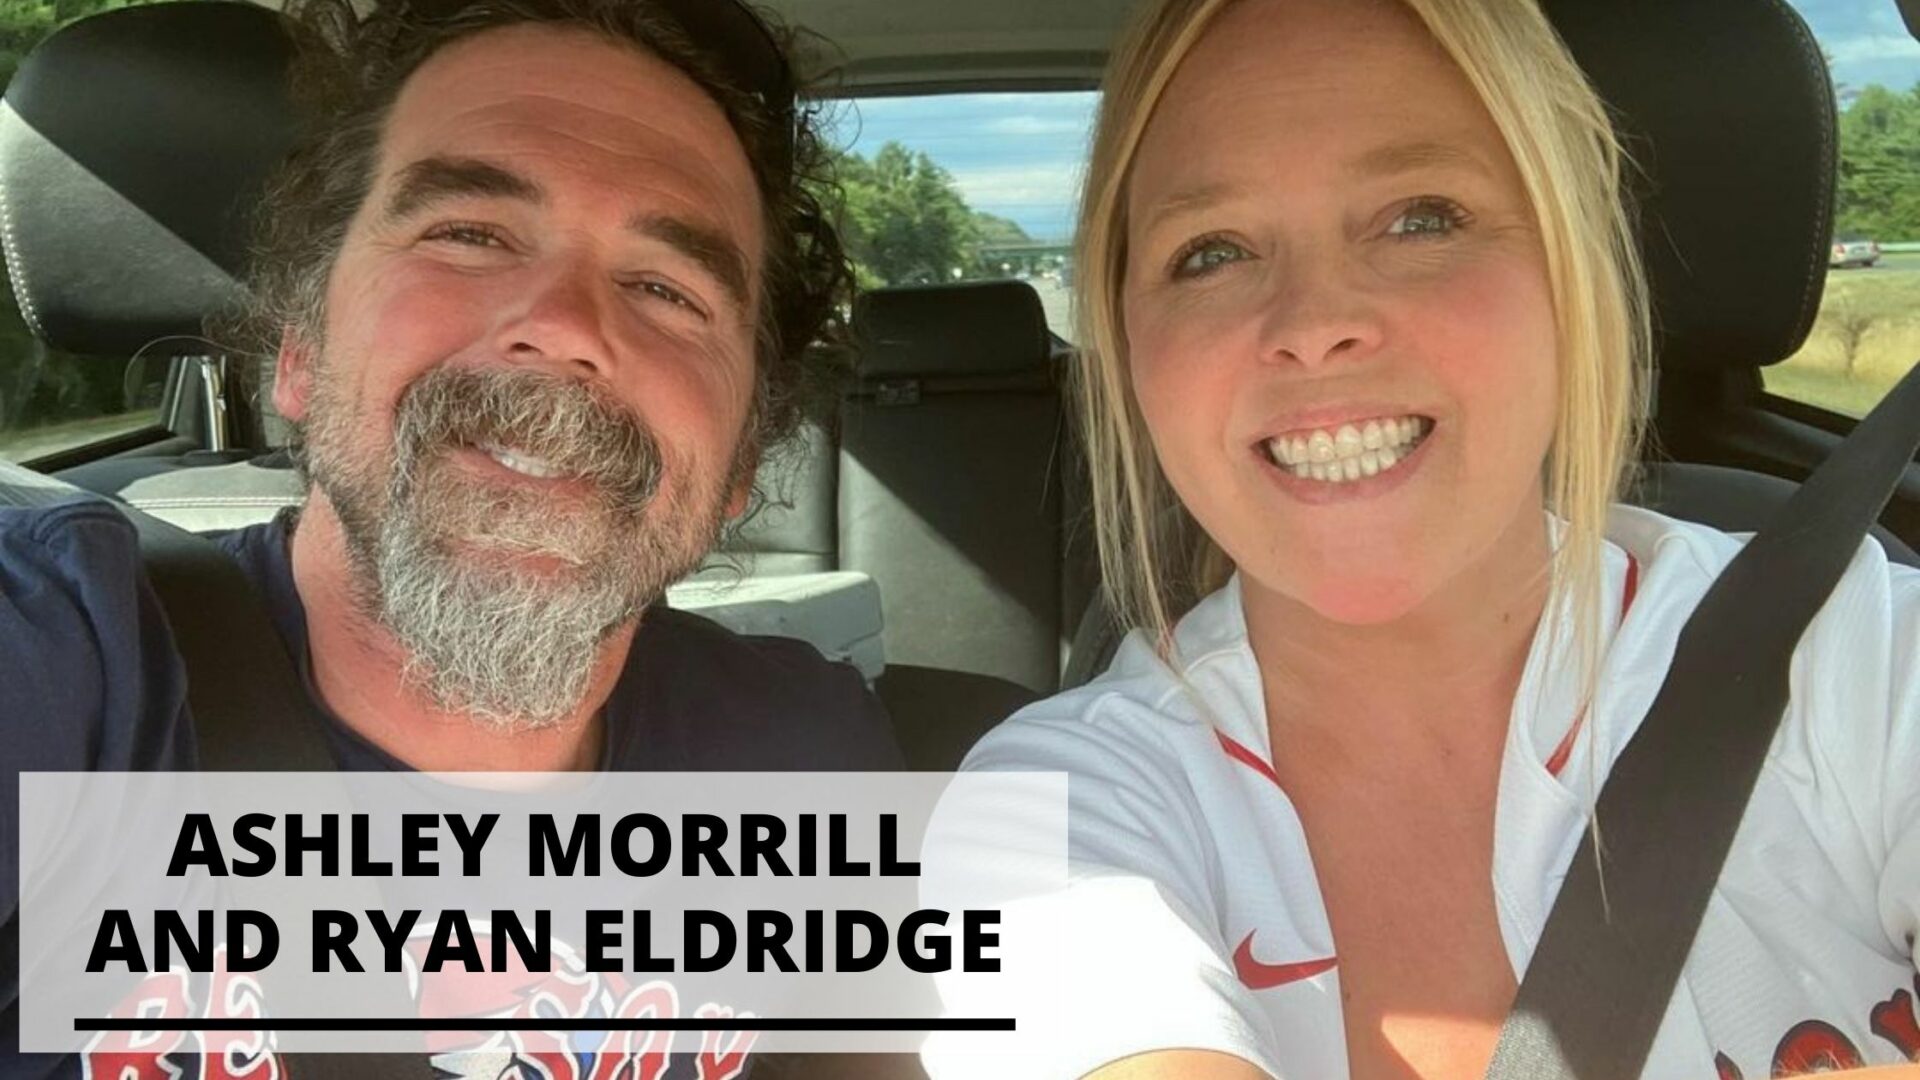 You are currently viewing 9 Best Pics of Ashley Morrill and Ryan Eldridge